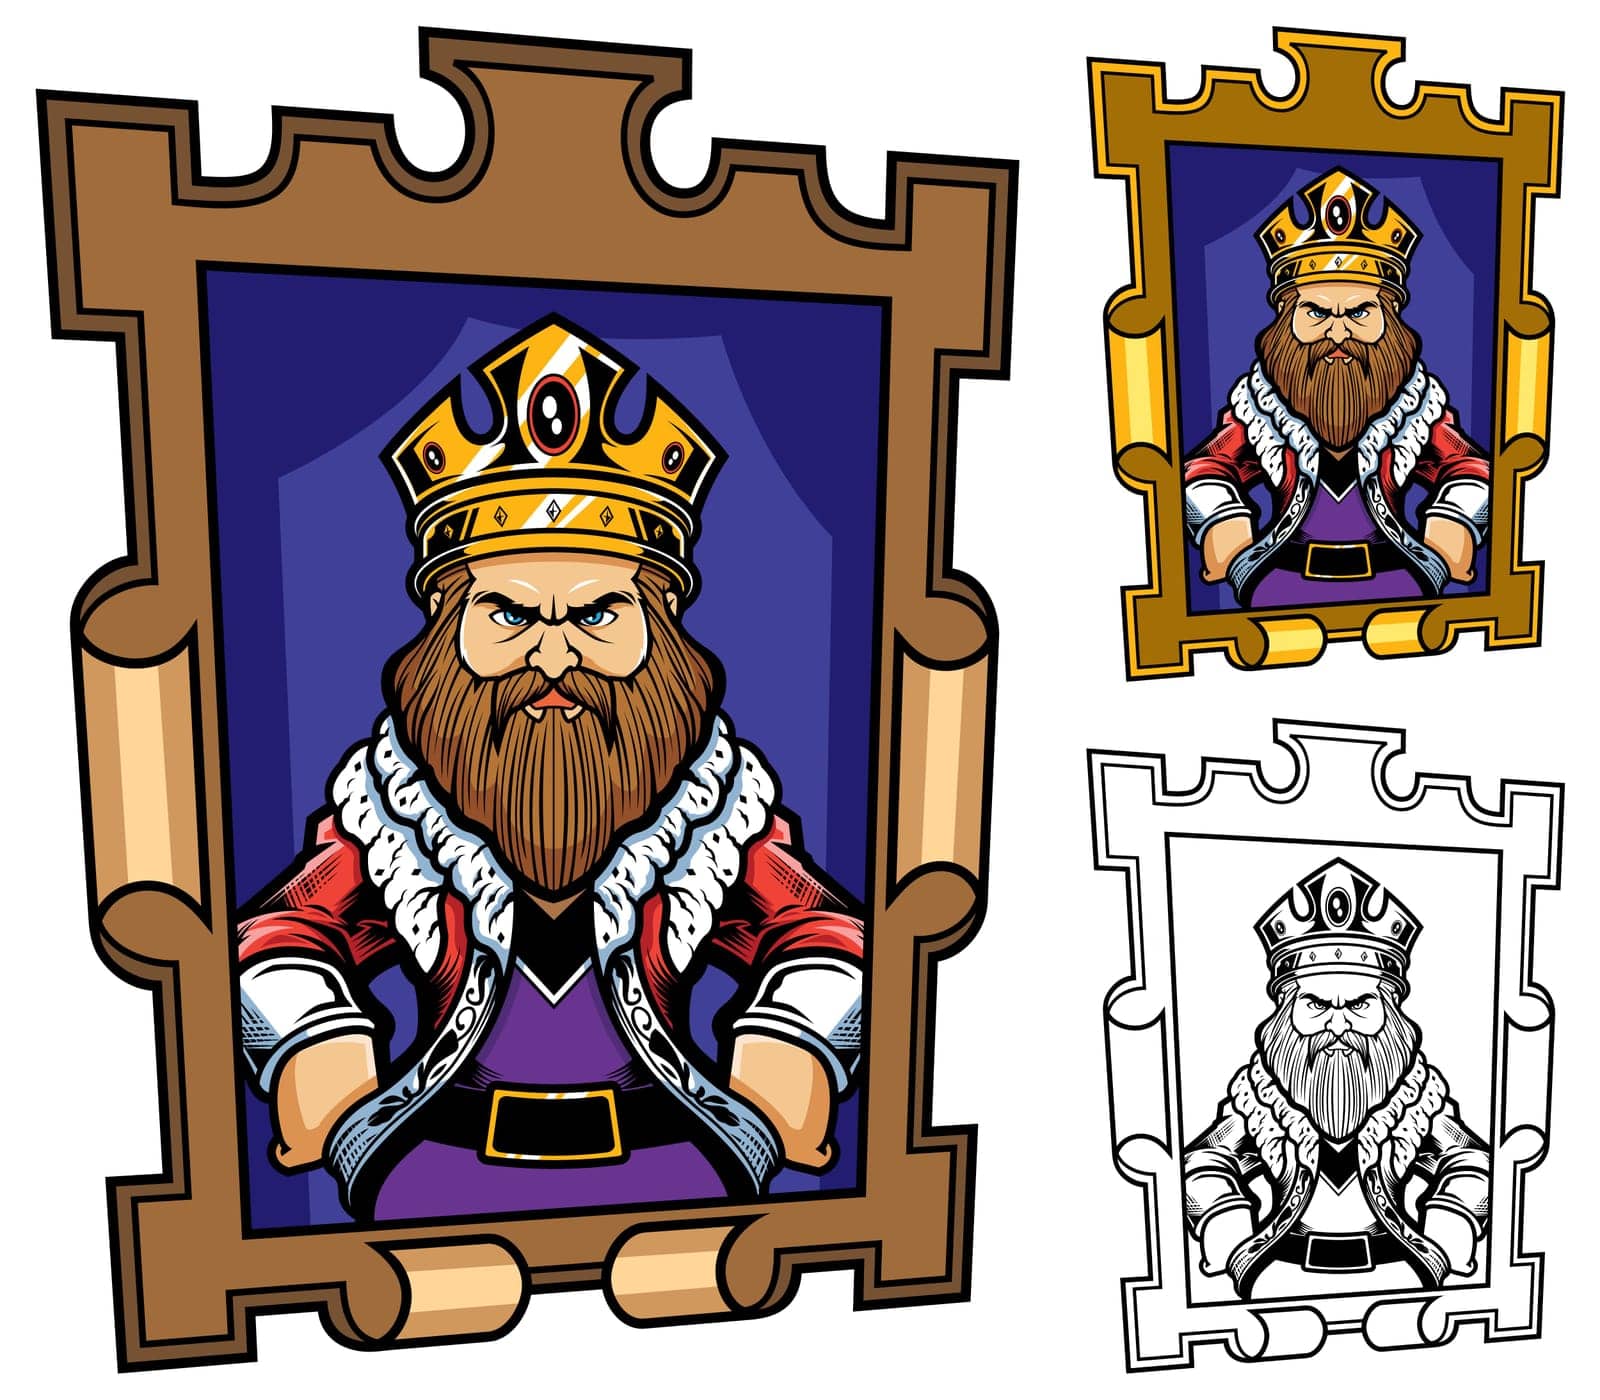 King portrait mascot or logo in 3 versions.